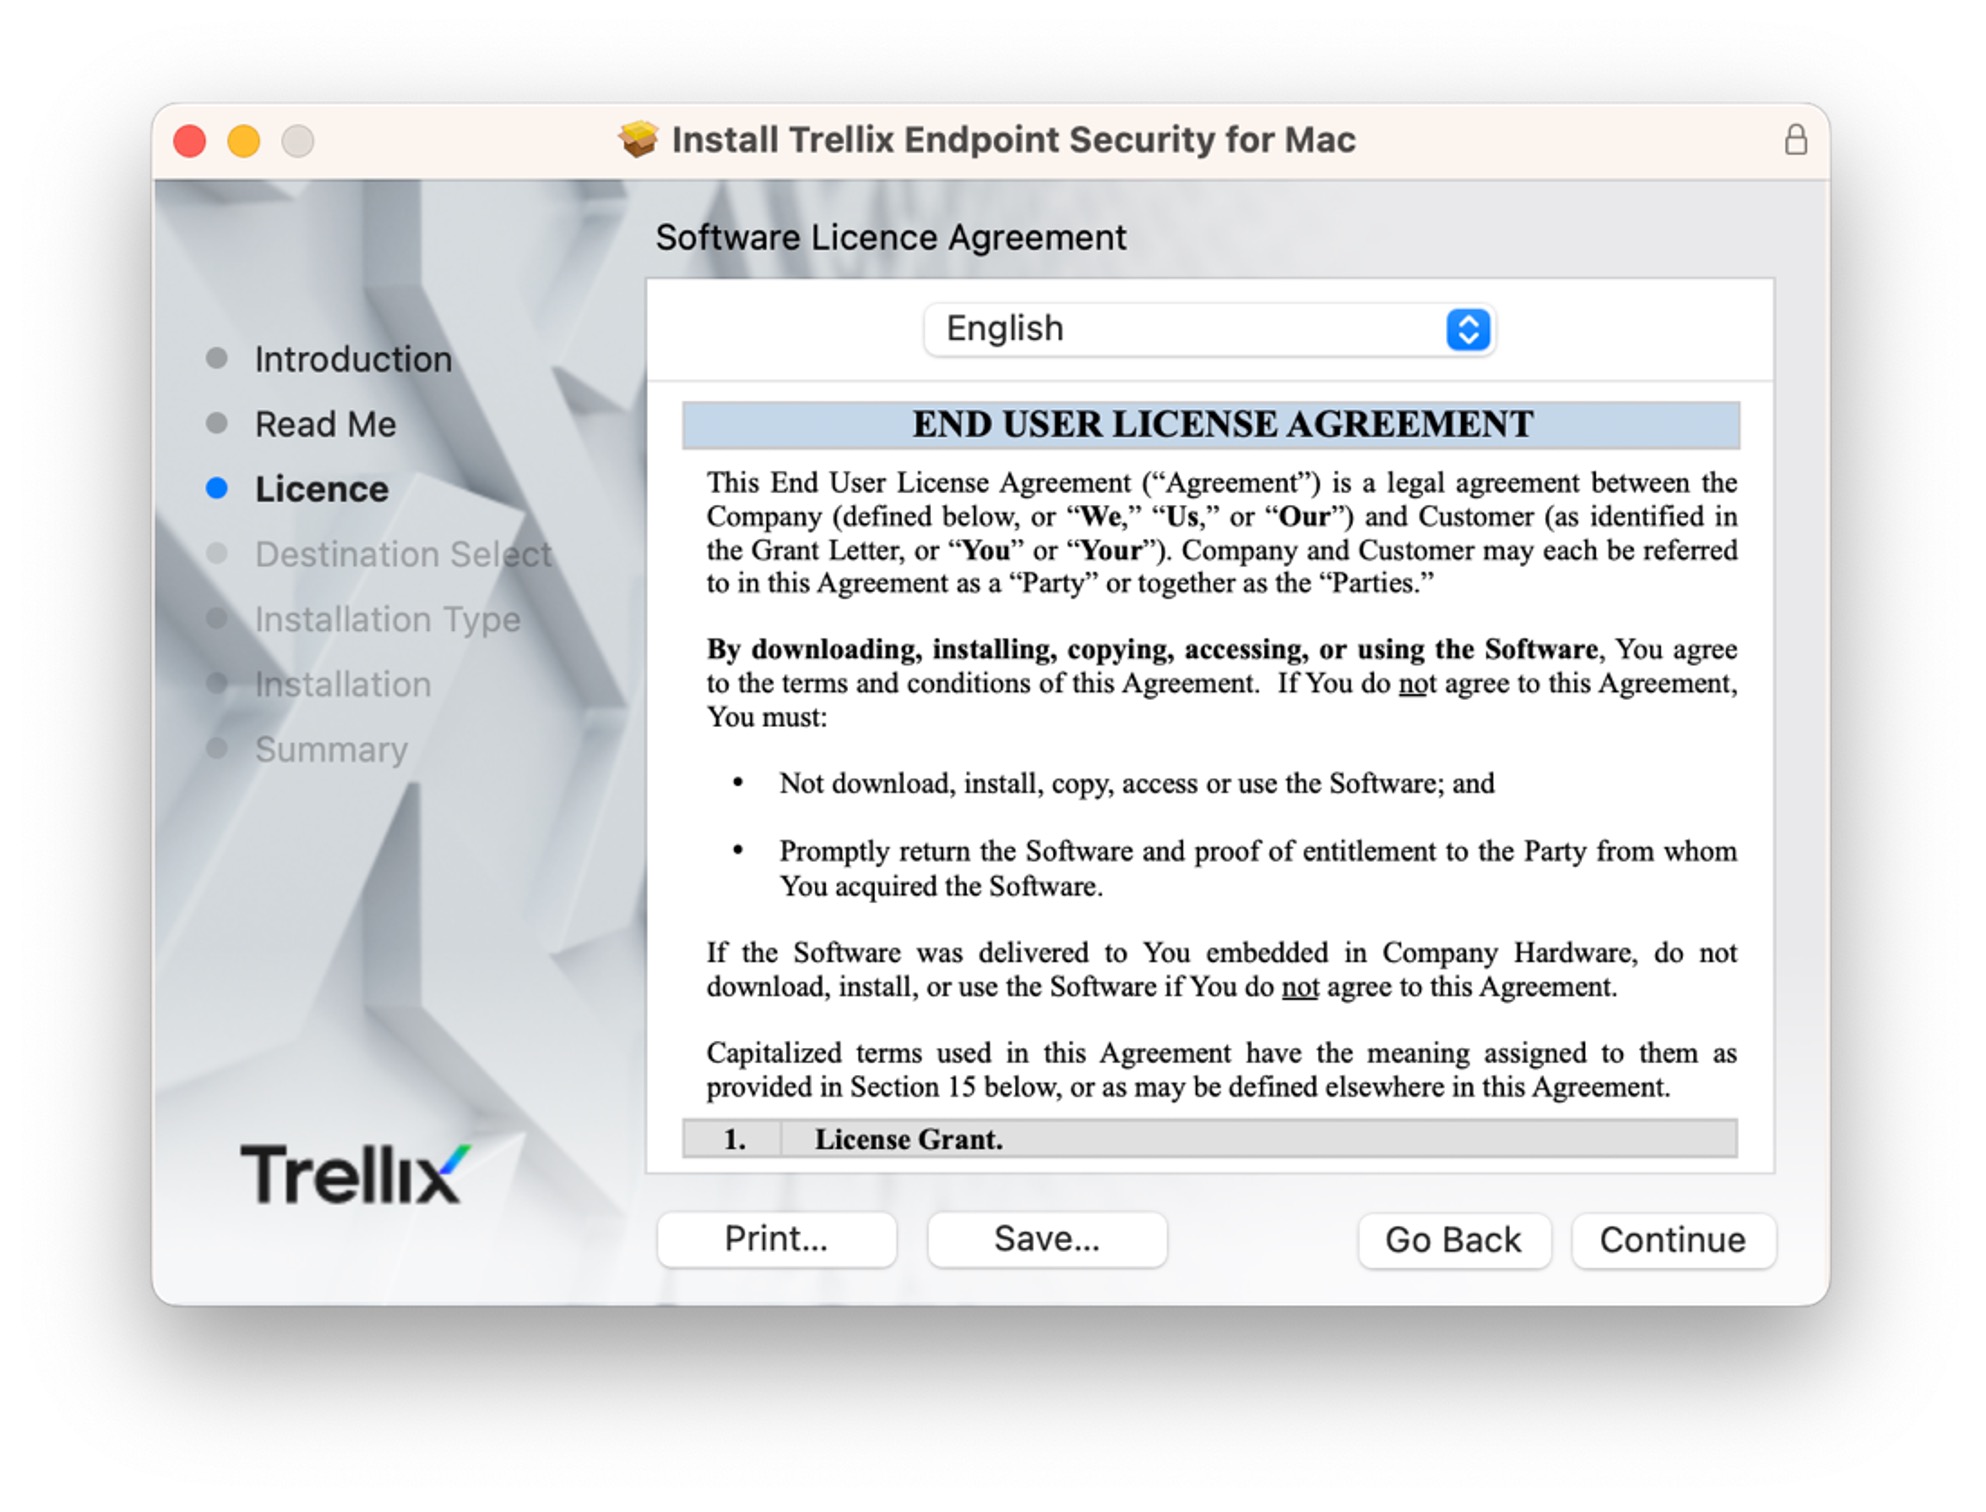 The software licence agreement screen for Trellix software.